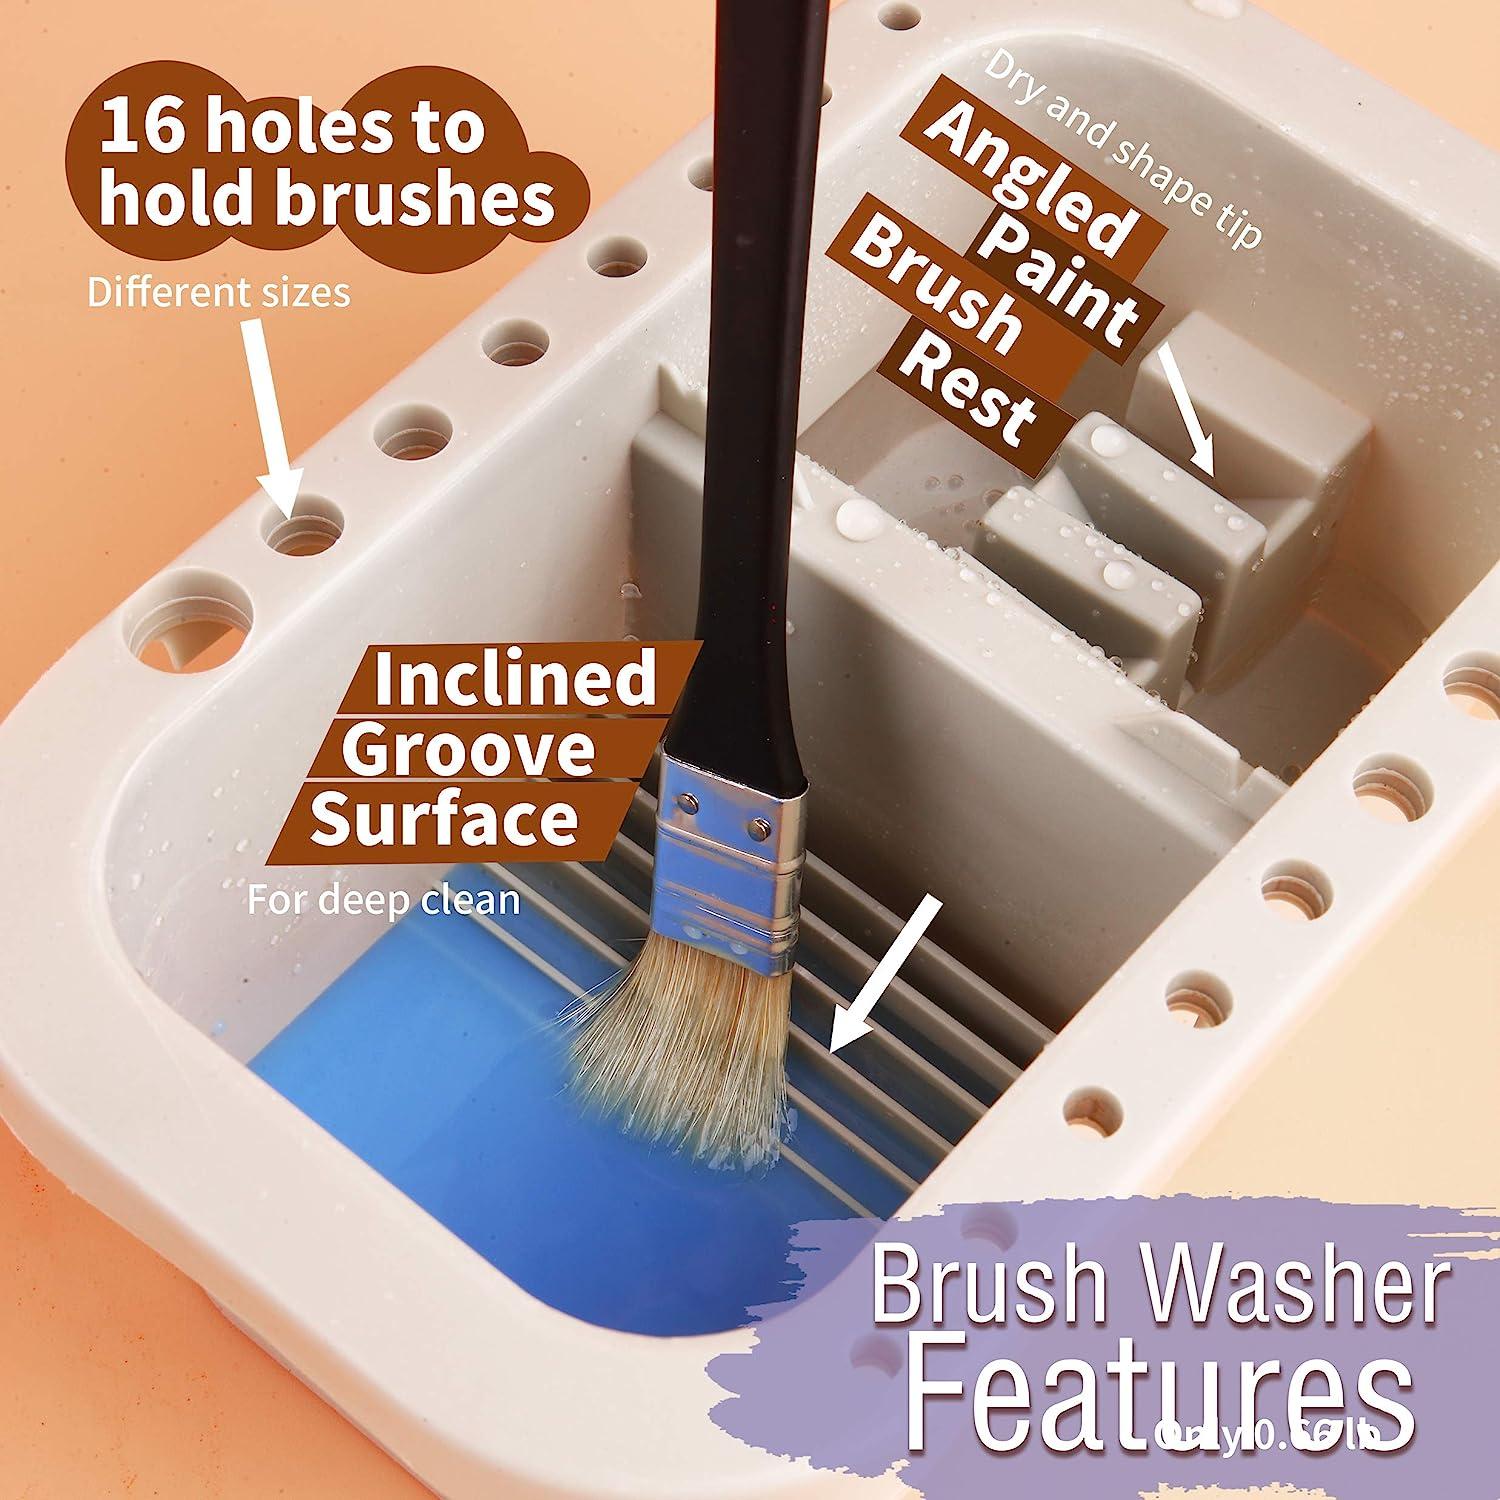 U.S. Art Supply 16 Hole Multi-Function Paint Brush Washer, Cleaner and  Holder, 18 Palette Wells, Lid Plastic - Clean, Dry, Rest, Store, Hold  Artist Brushes - Cleaning Acrylic, Watercolor, Oil Painting 